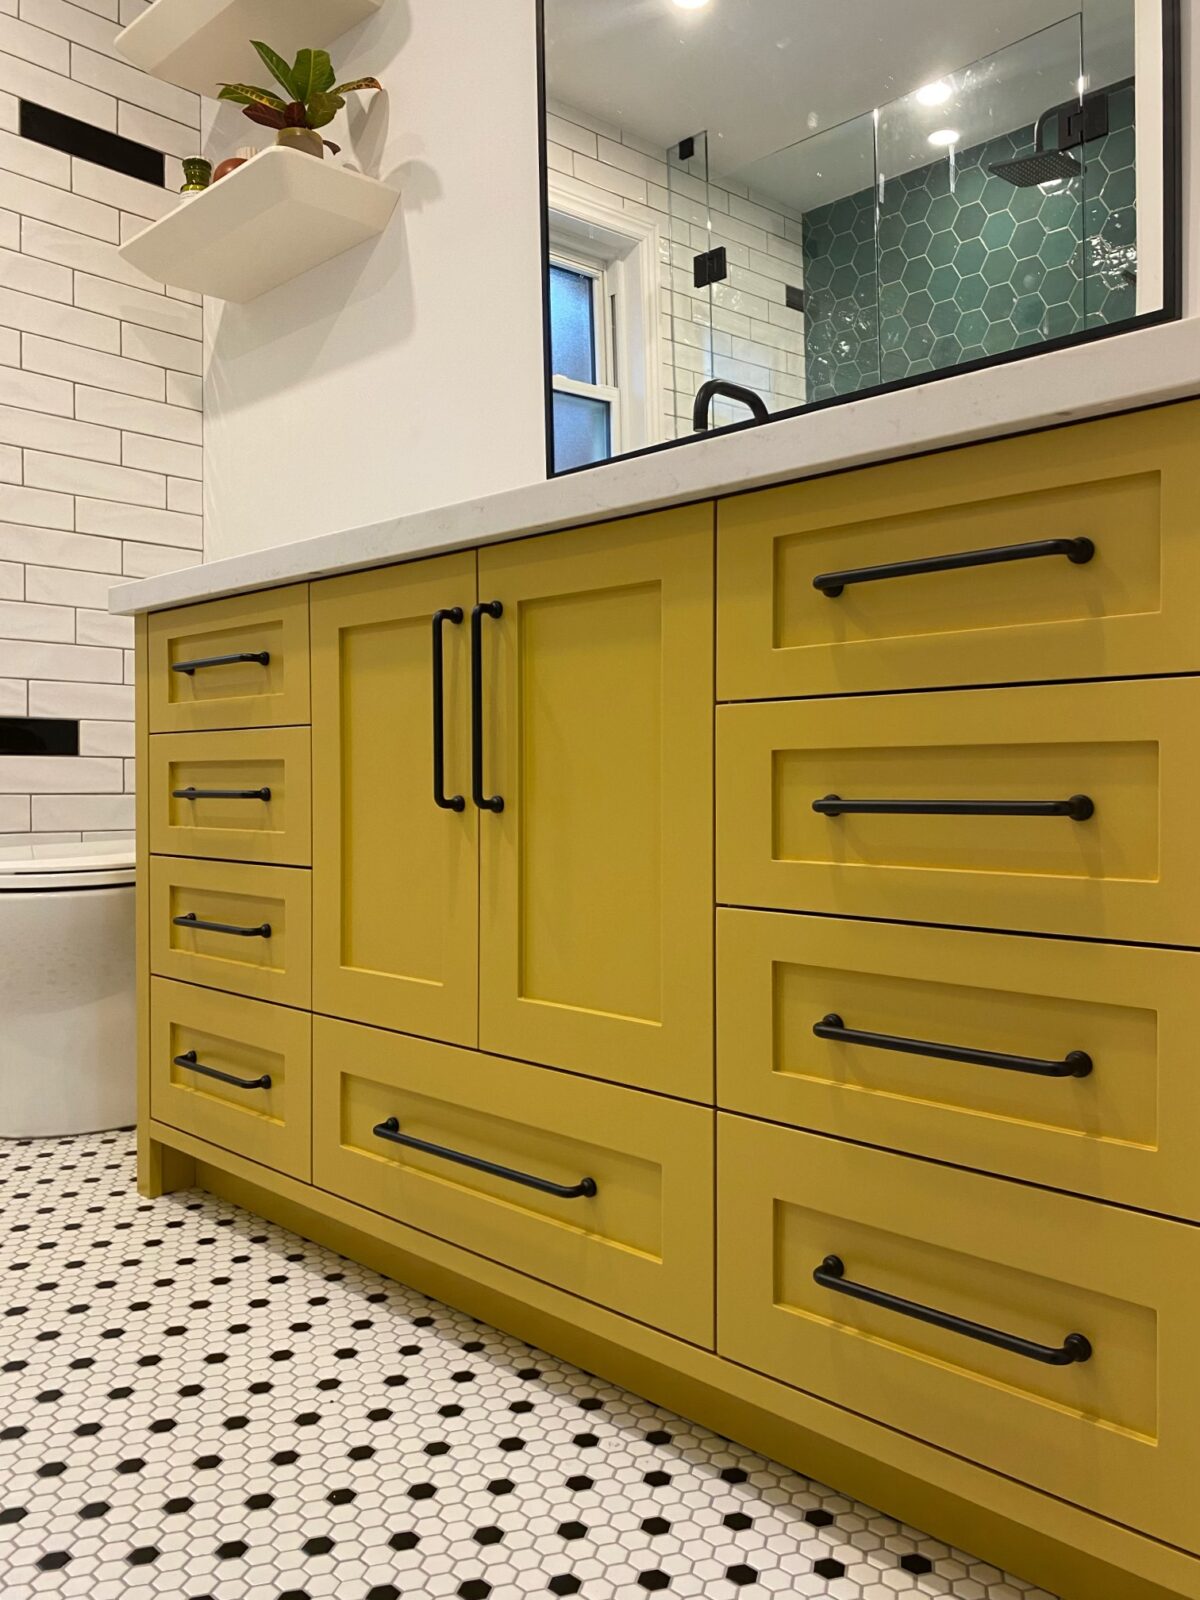 Professional Cabinet Painting – Notes for Contractors